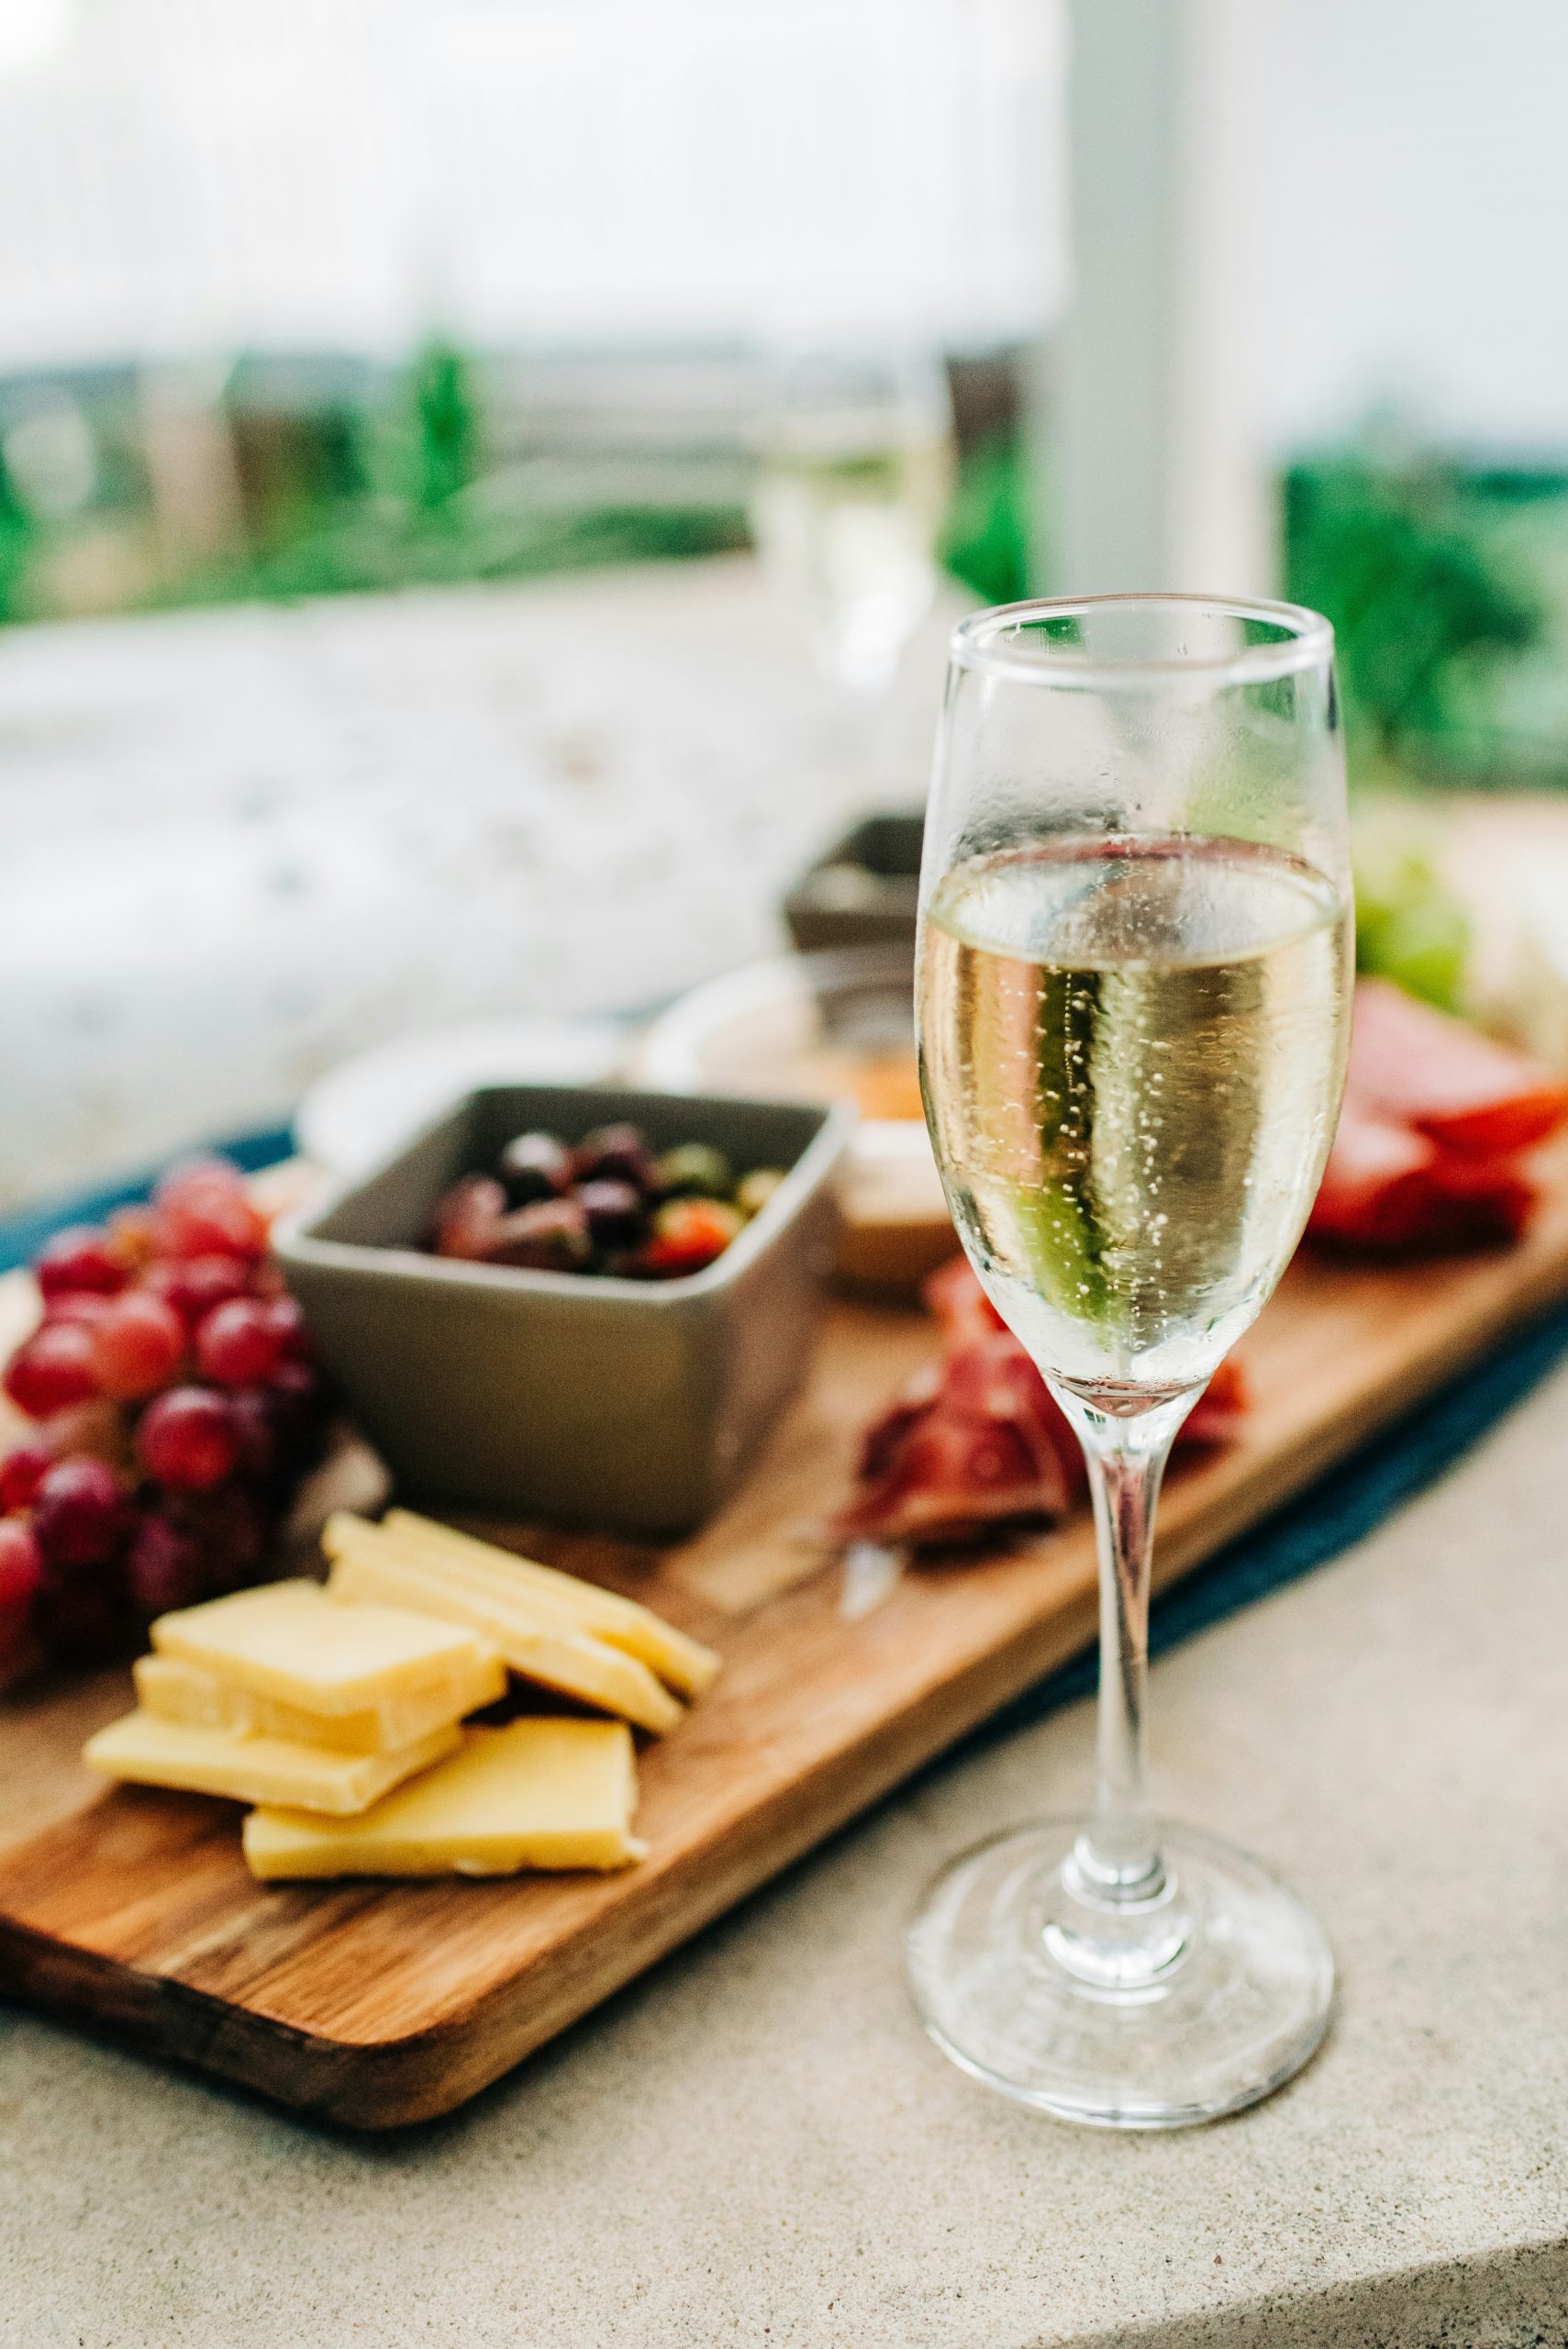 how sweet is sparkling wine?